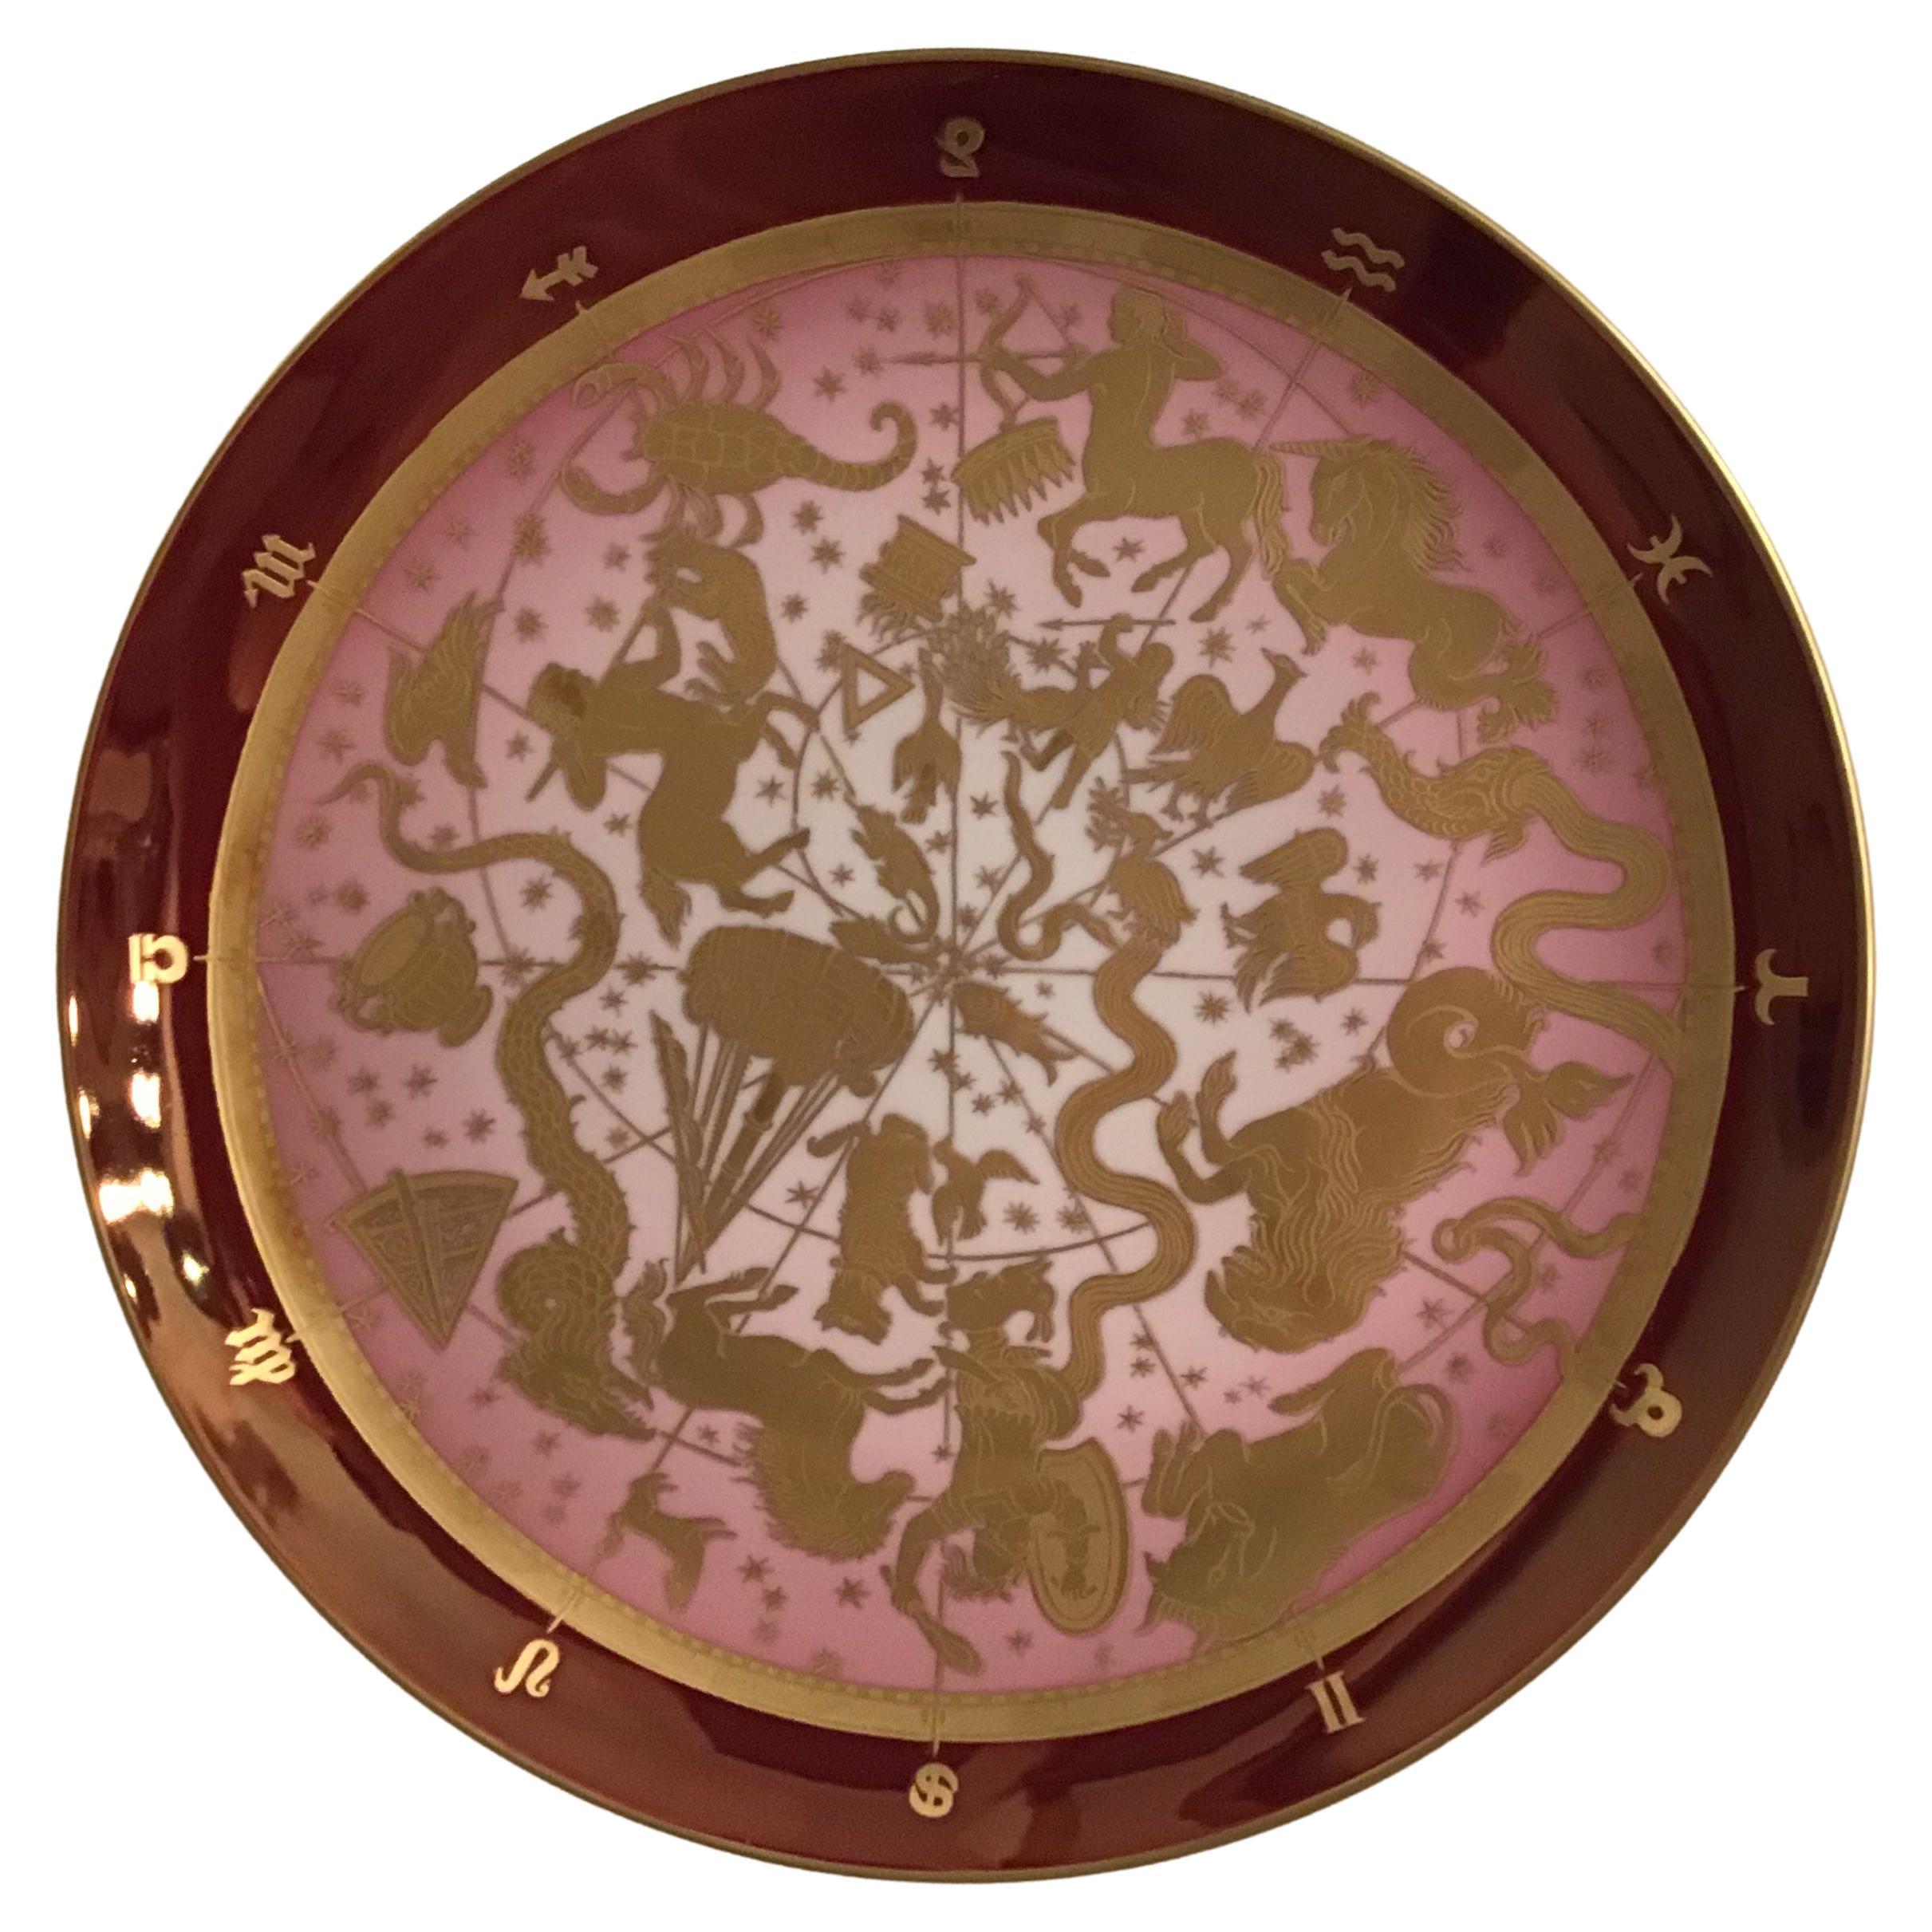 Morbelli Porcelain Wall Plate “Planisfero Celeste“ Worked with Pure Gold 1960 IT For Sale